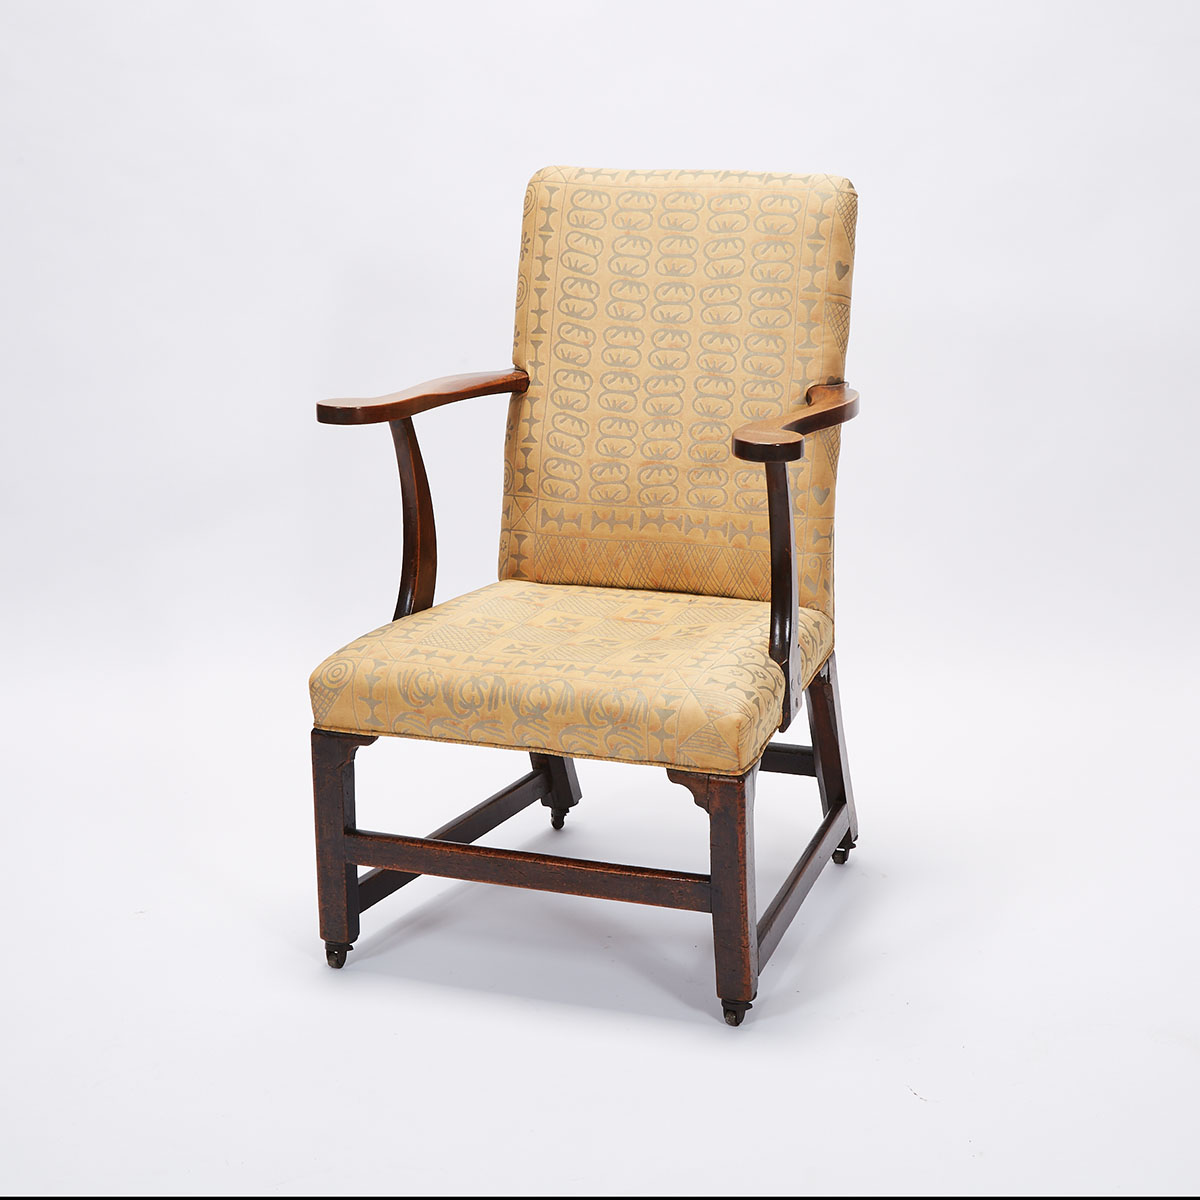 George III Mahogany Open Arm Library Chair, 18th century